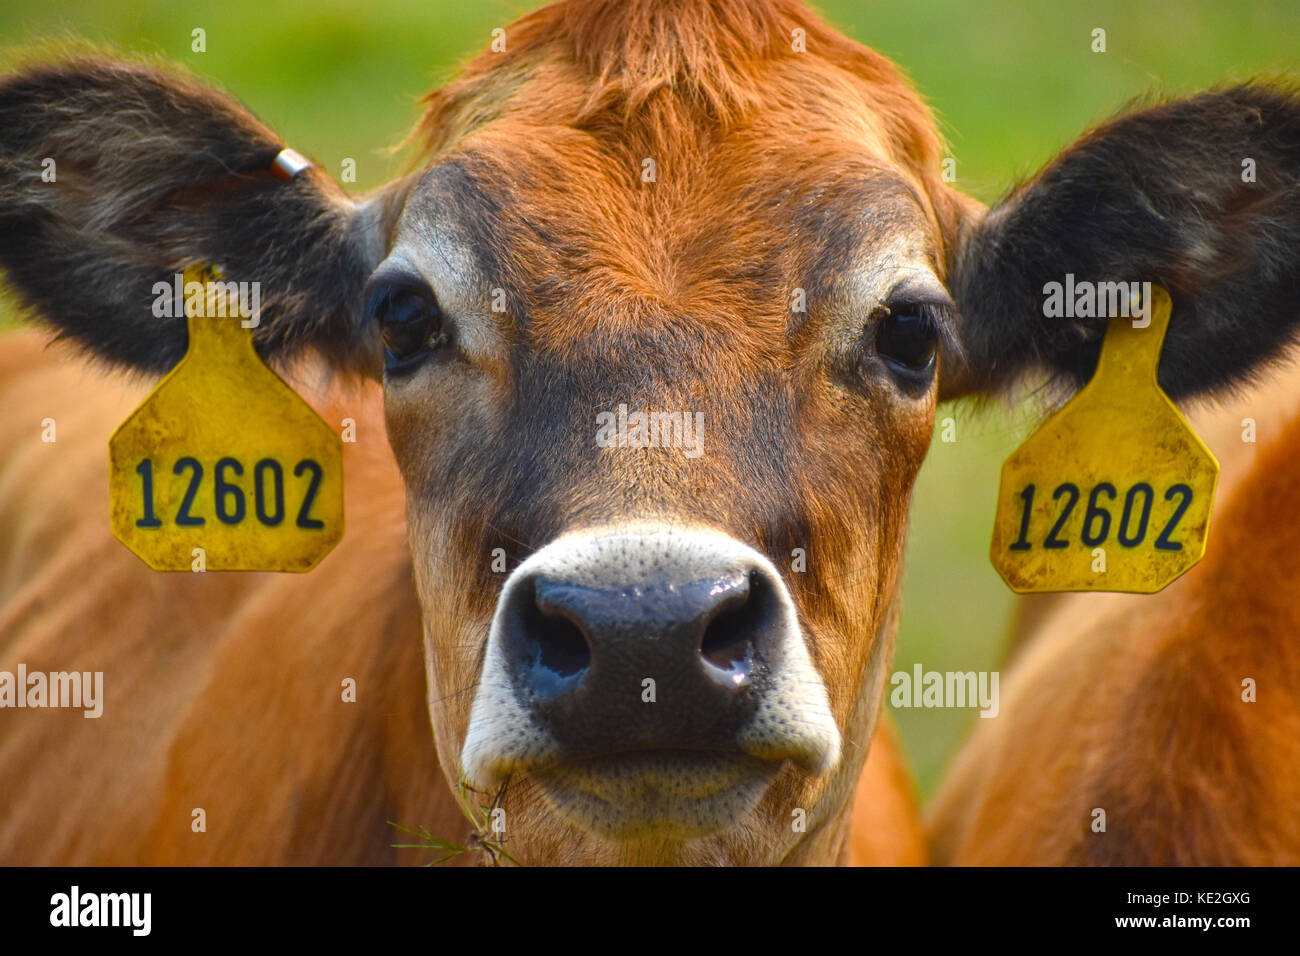 Cow headshot with identification tags in ears Stock Photo